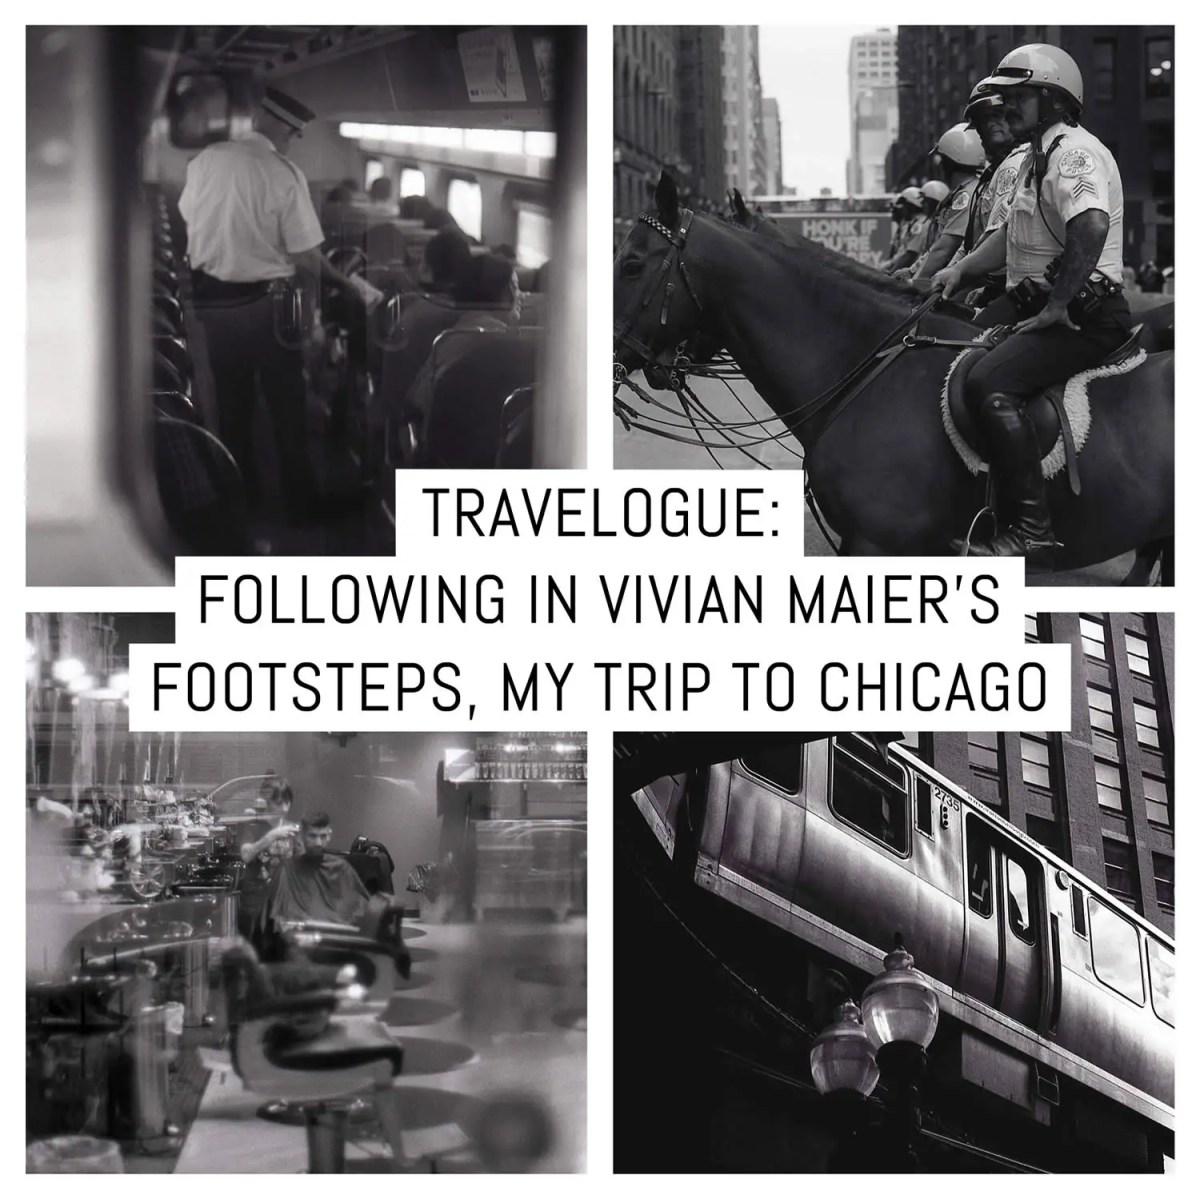 Cover: Travelogue - Following in Vivian Maier's footsteps, my trip to Chicago